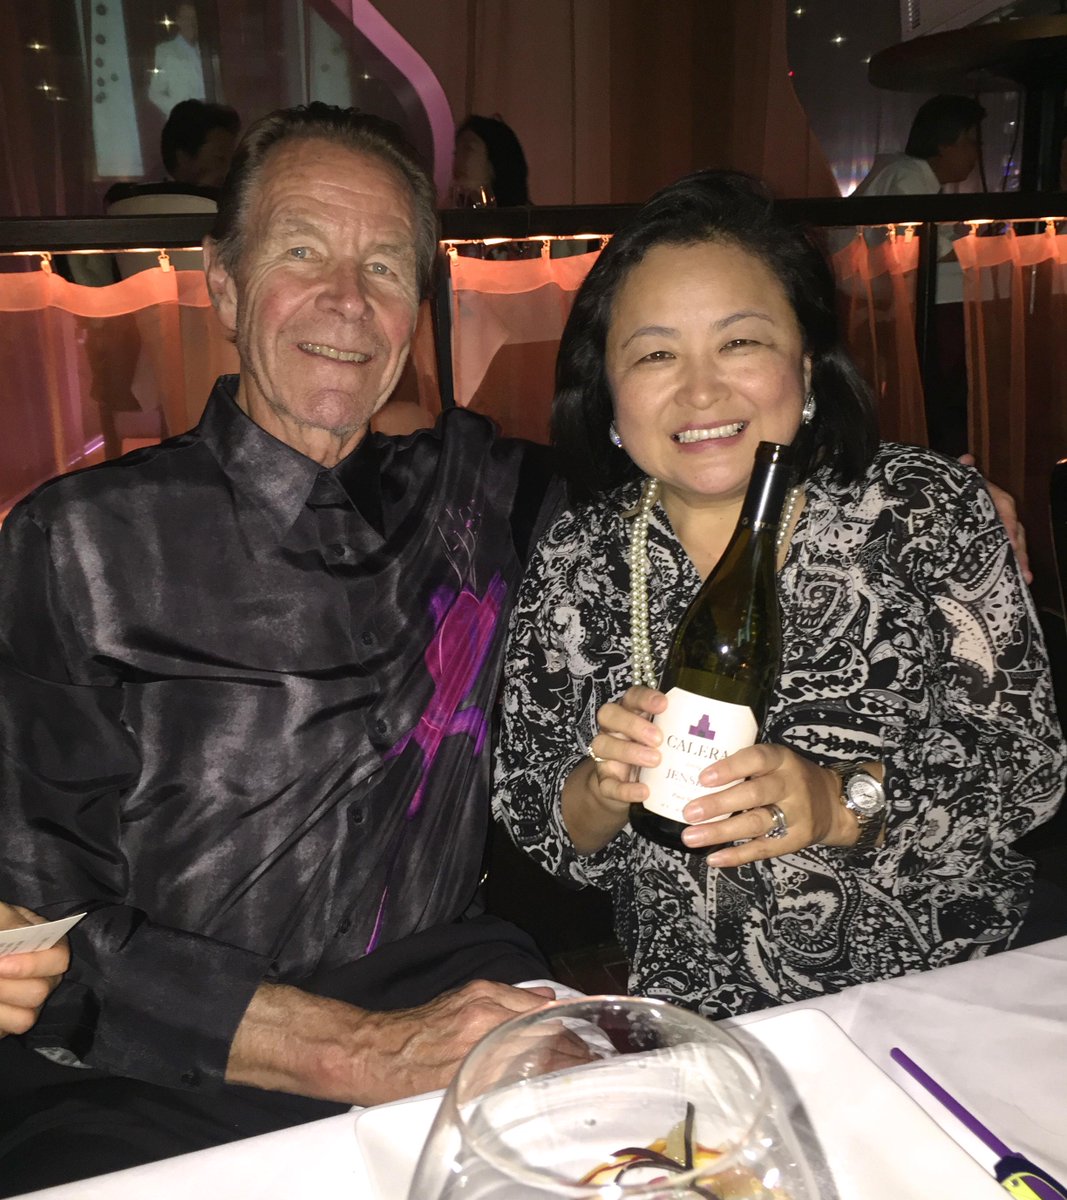 @ycarolines and Josh Jensen, @Calera_Winery, hosted a winemaker's dinner for 80 at Dazzle, in Tokyo's Ginza District.